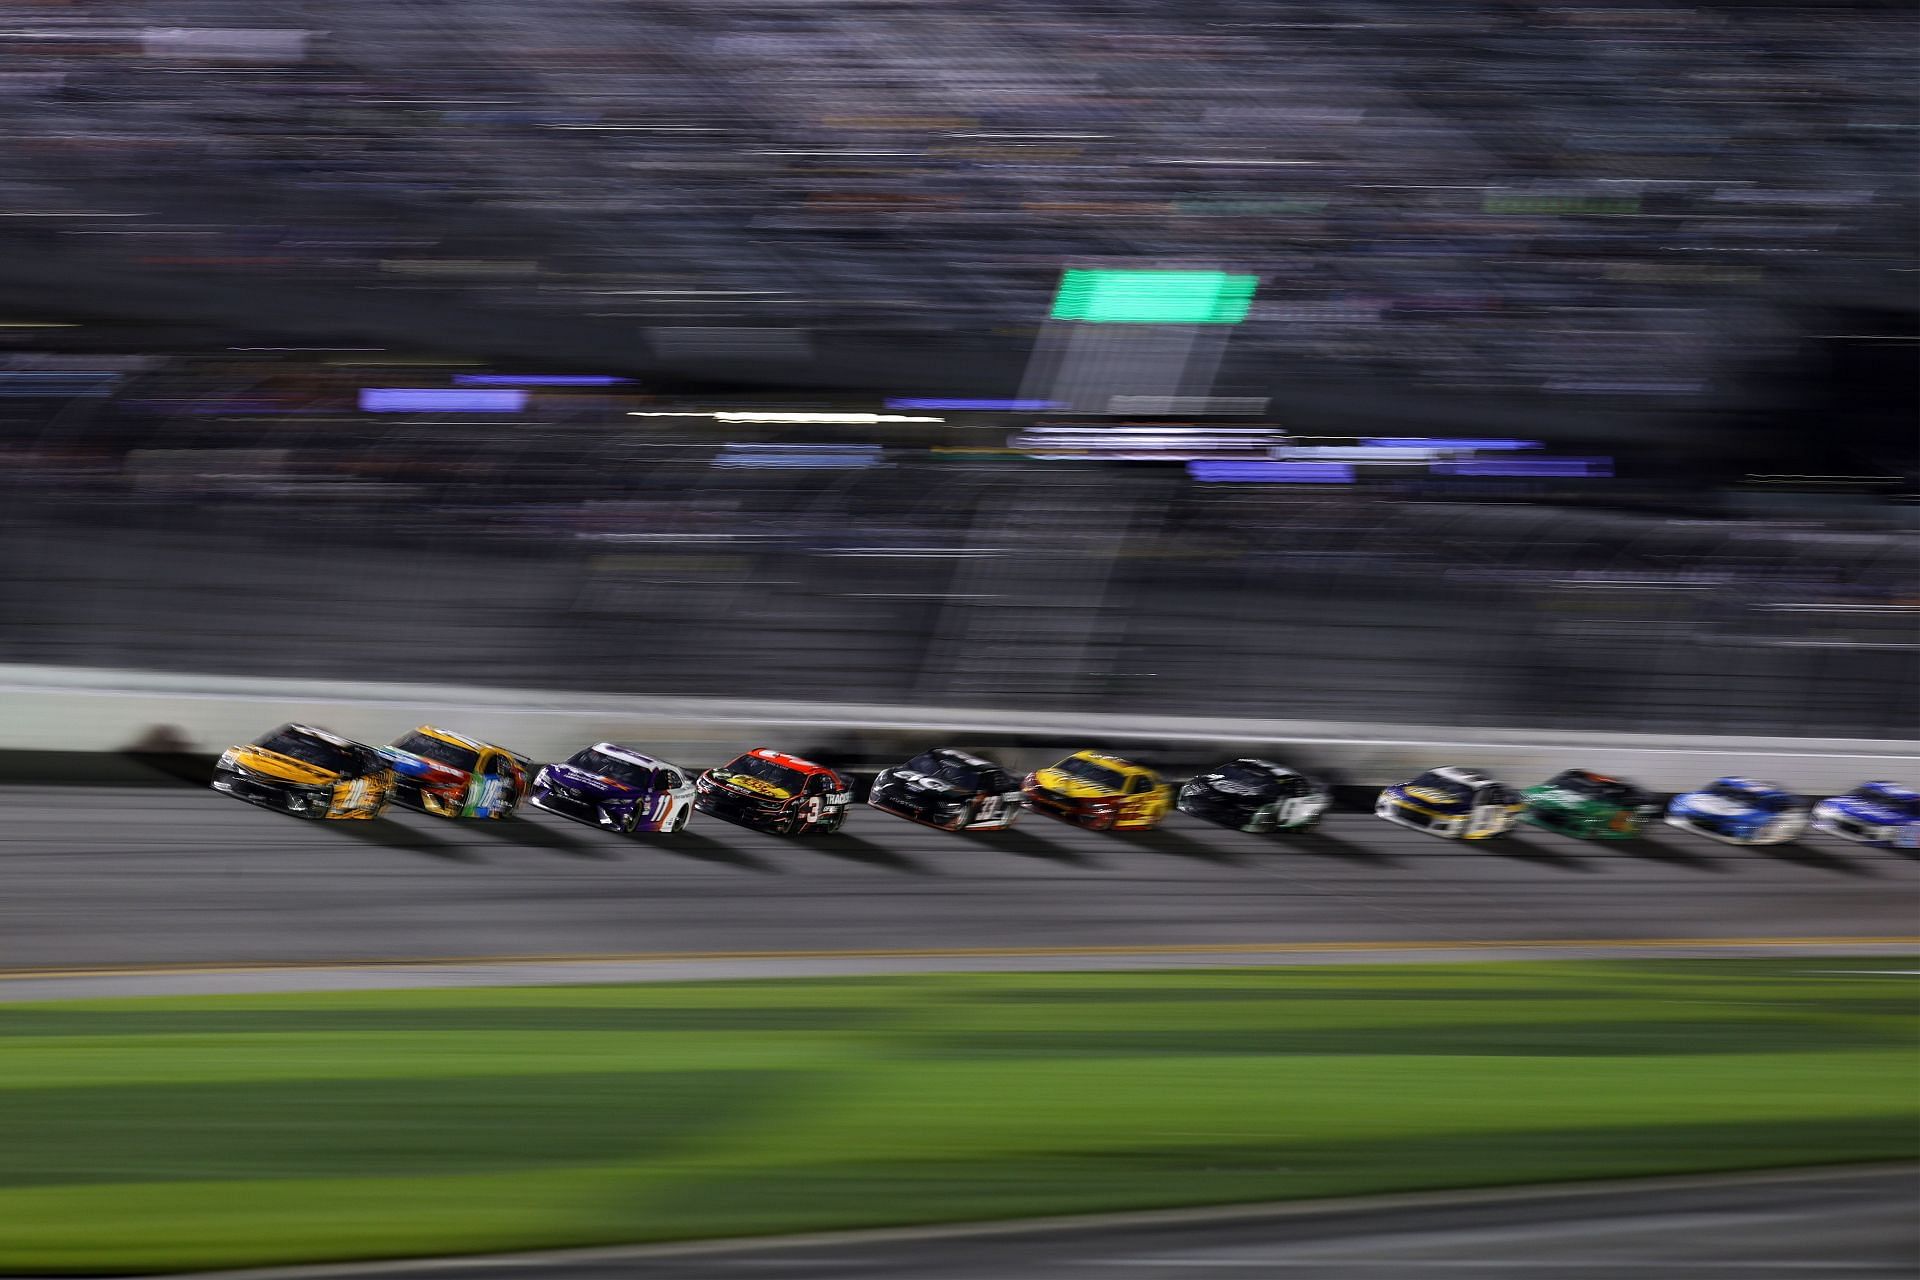 The NASCAR Cup Series 63rd Annual Daytona 500 underway on February 14, 2021 (Photo by Jared C. Tilton/Getty Images)